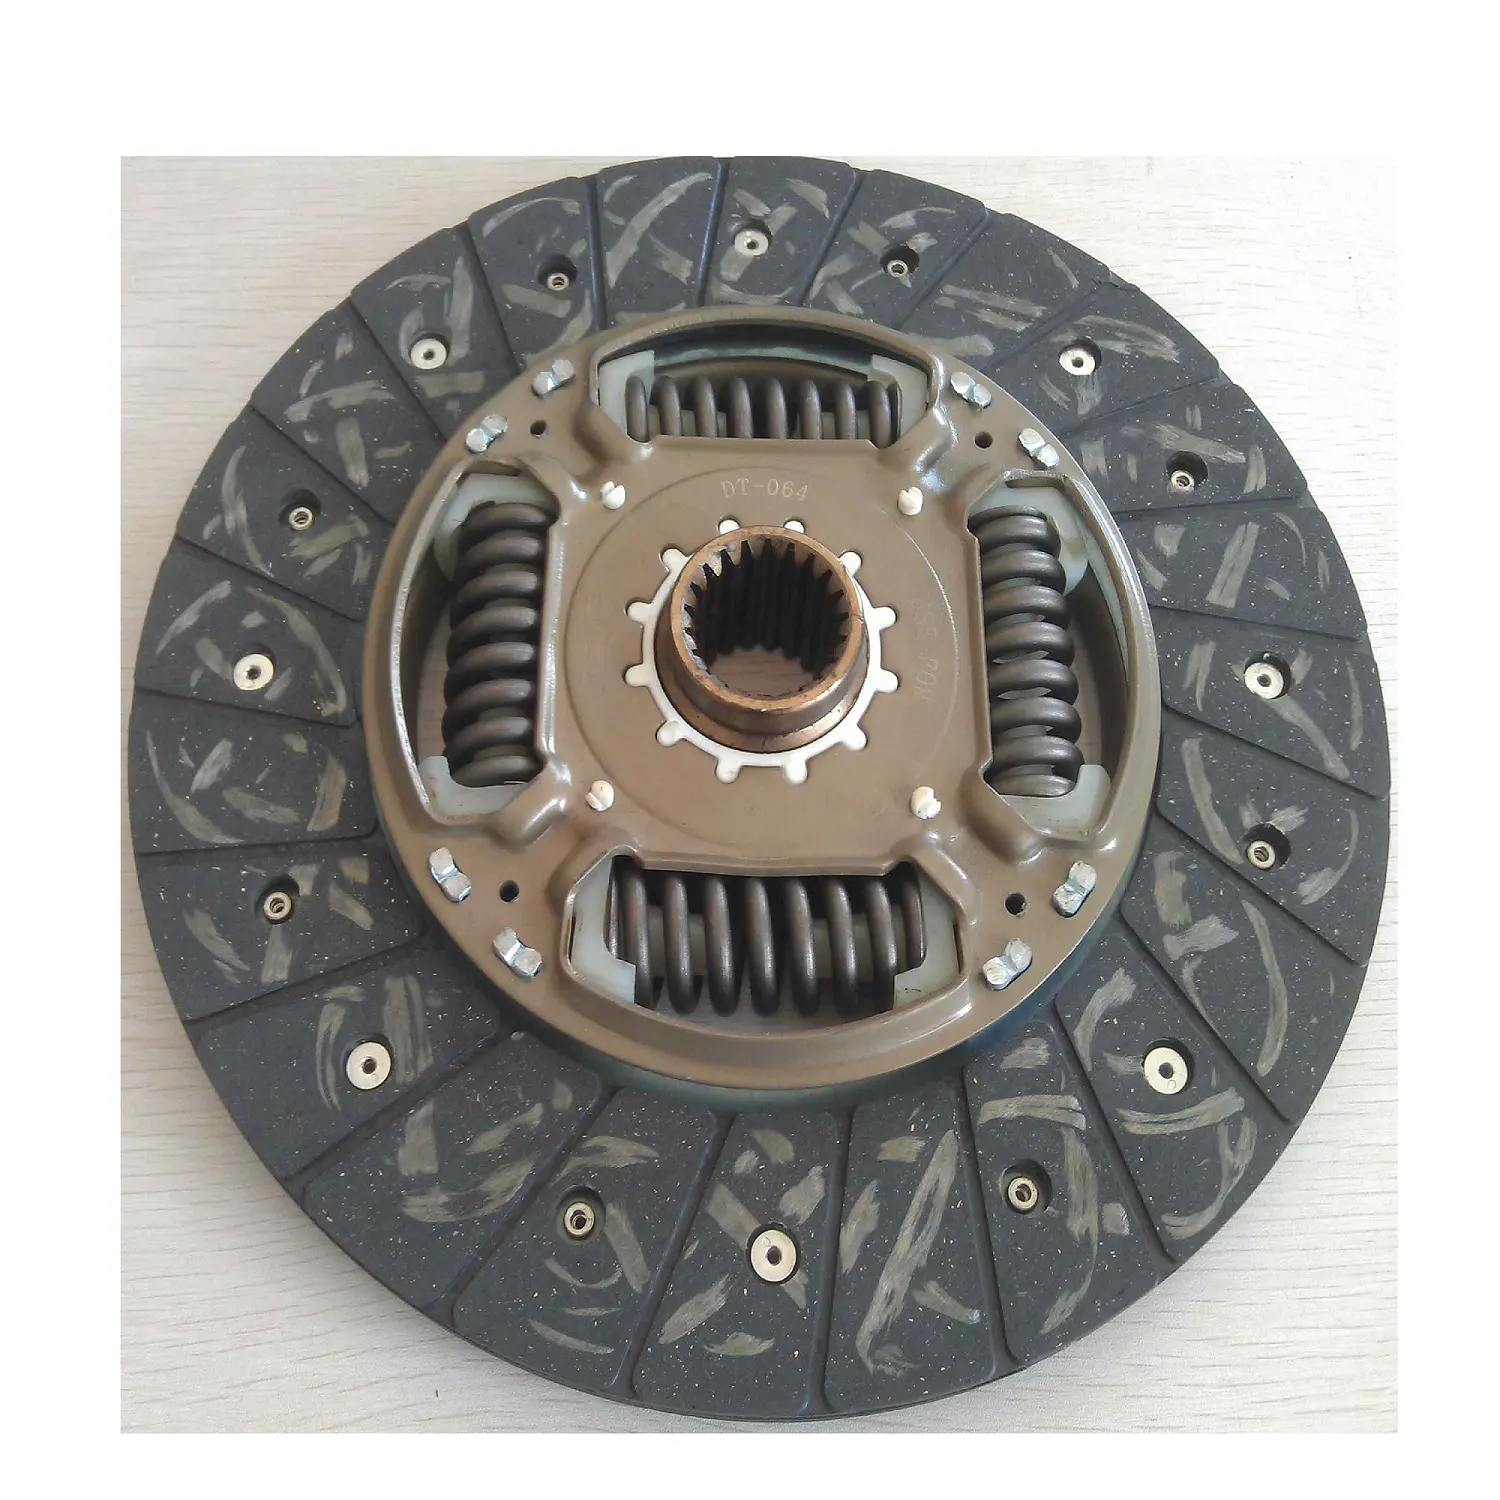 2KD engine clutch disc Bus clutch kit clutch cover for iveco Daily OEM 31250-0K020 engine Platform Chassi FOR toyota hiace